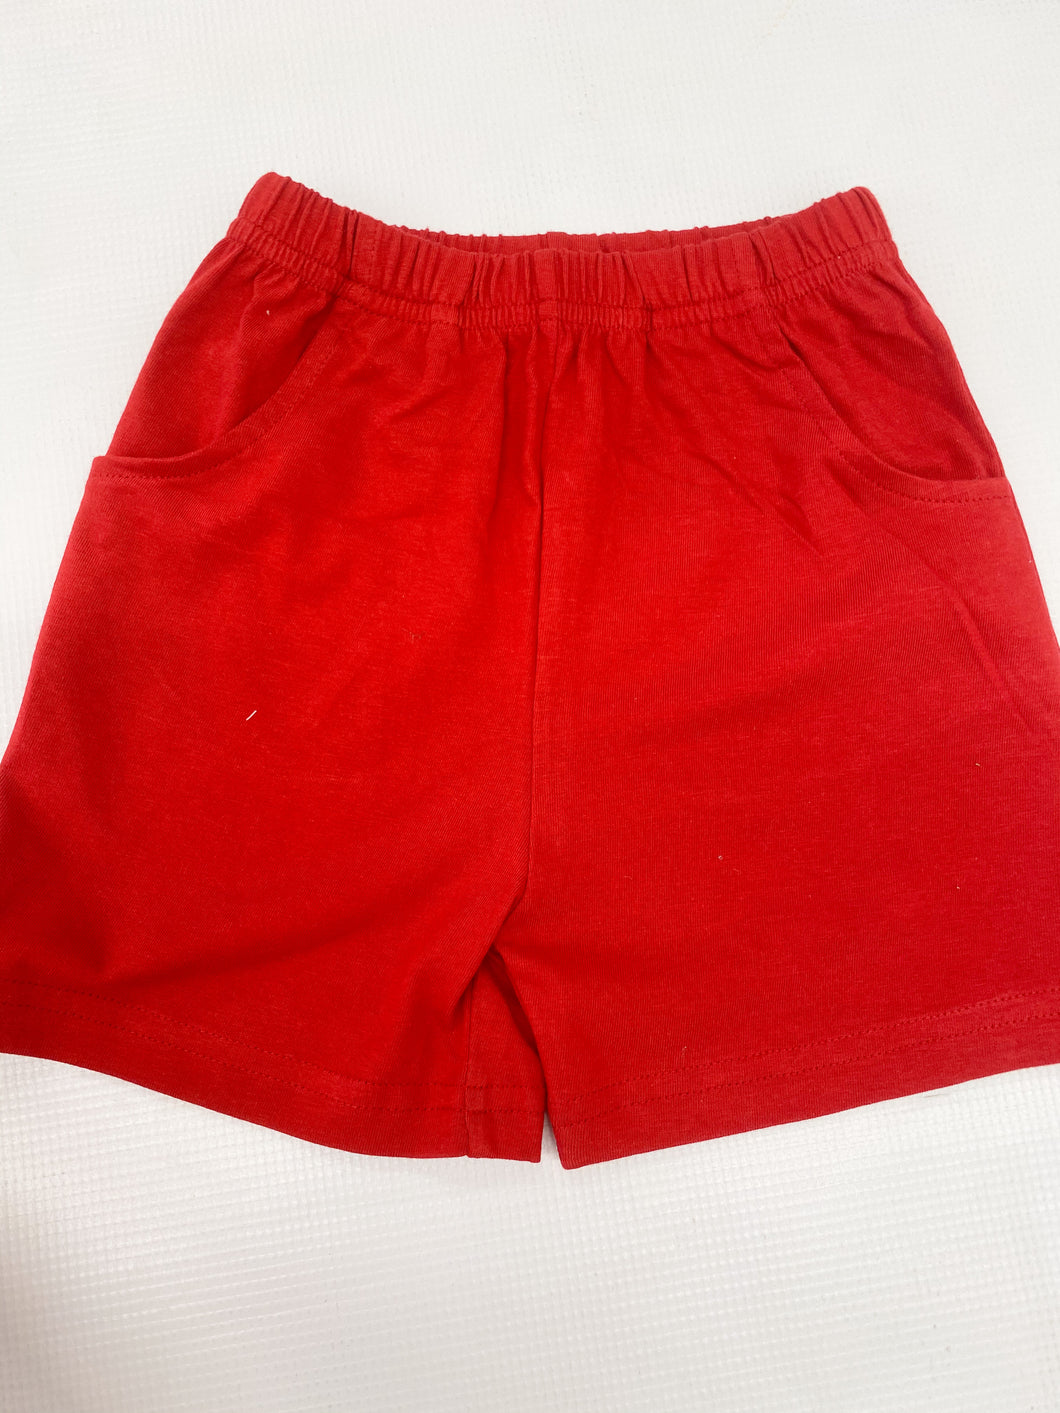 Red Knit Shorts w/ Pockets